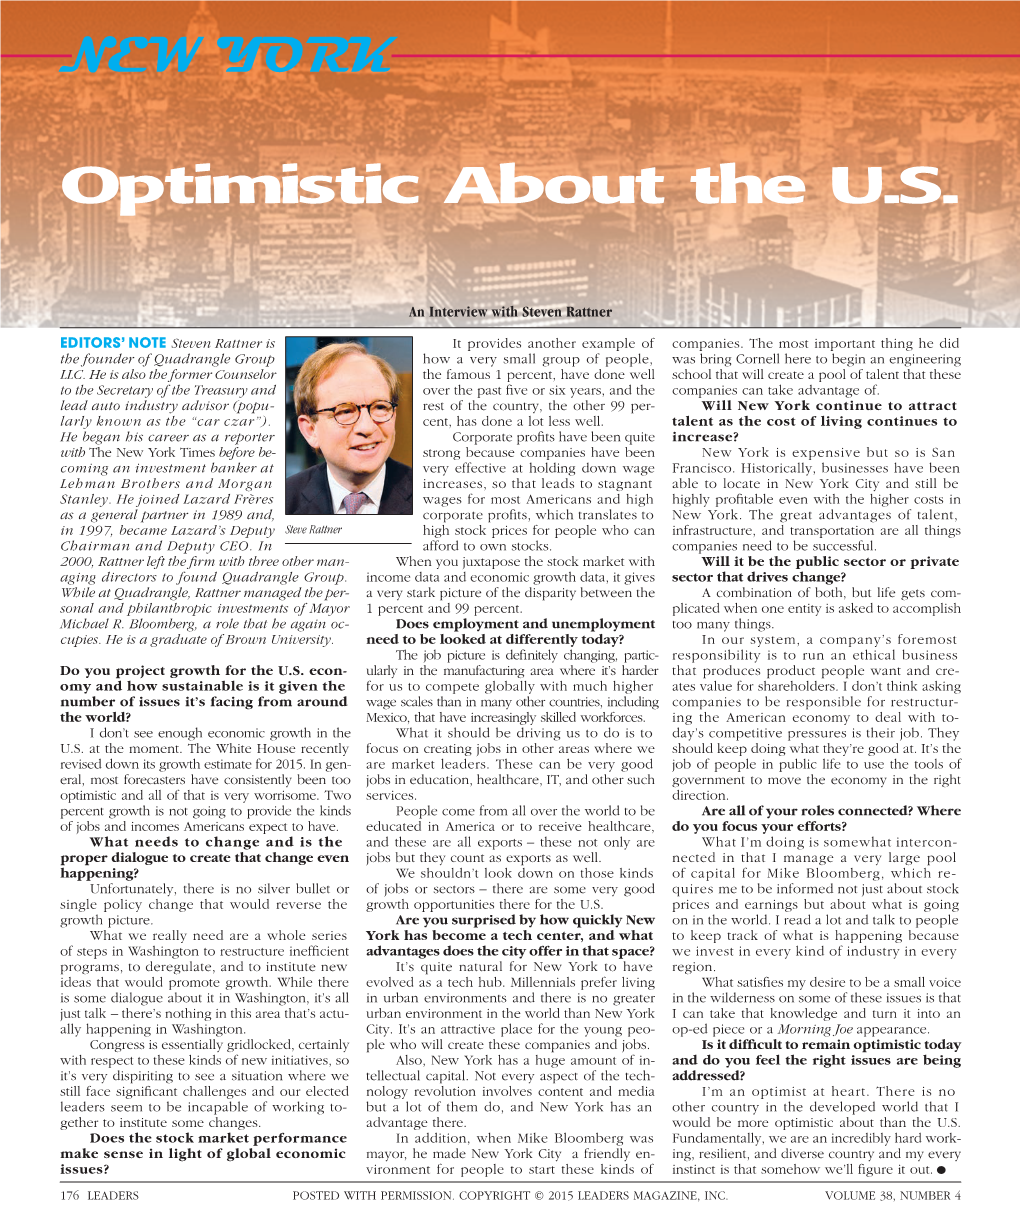 To Download a PDF of an Interview with Steven Rattner